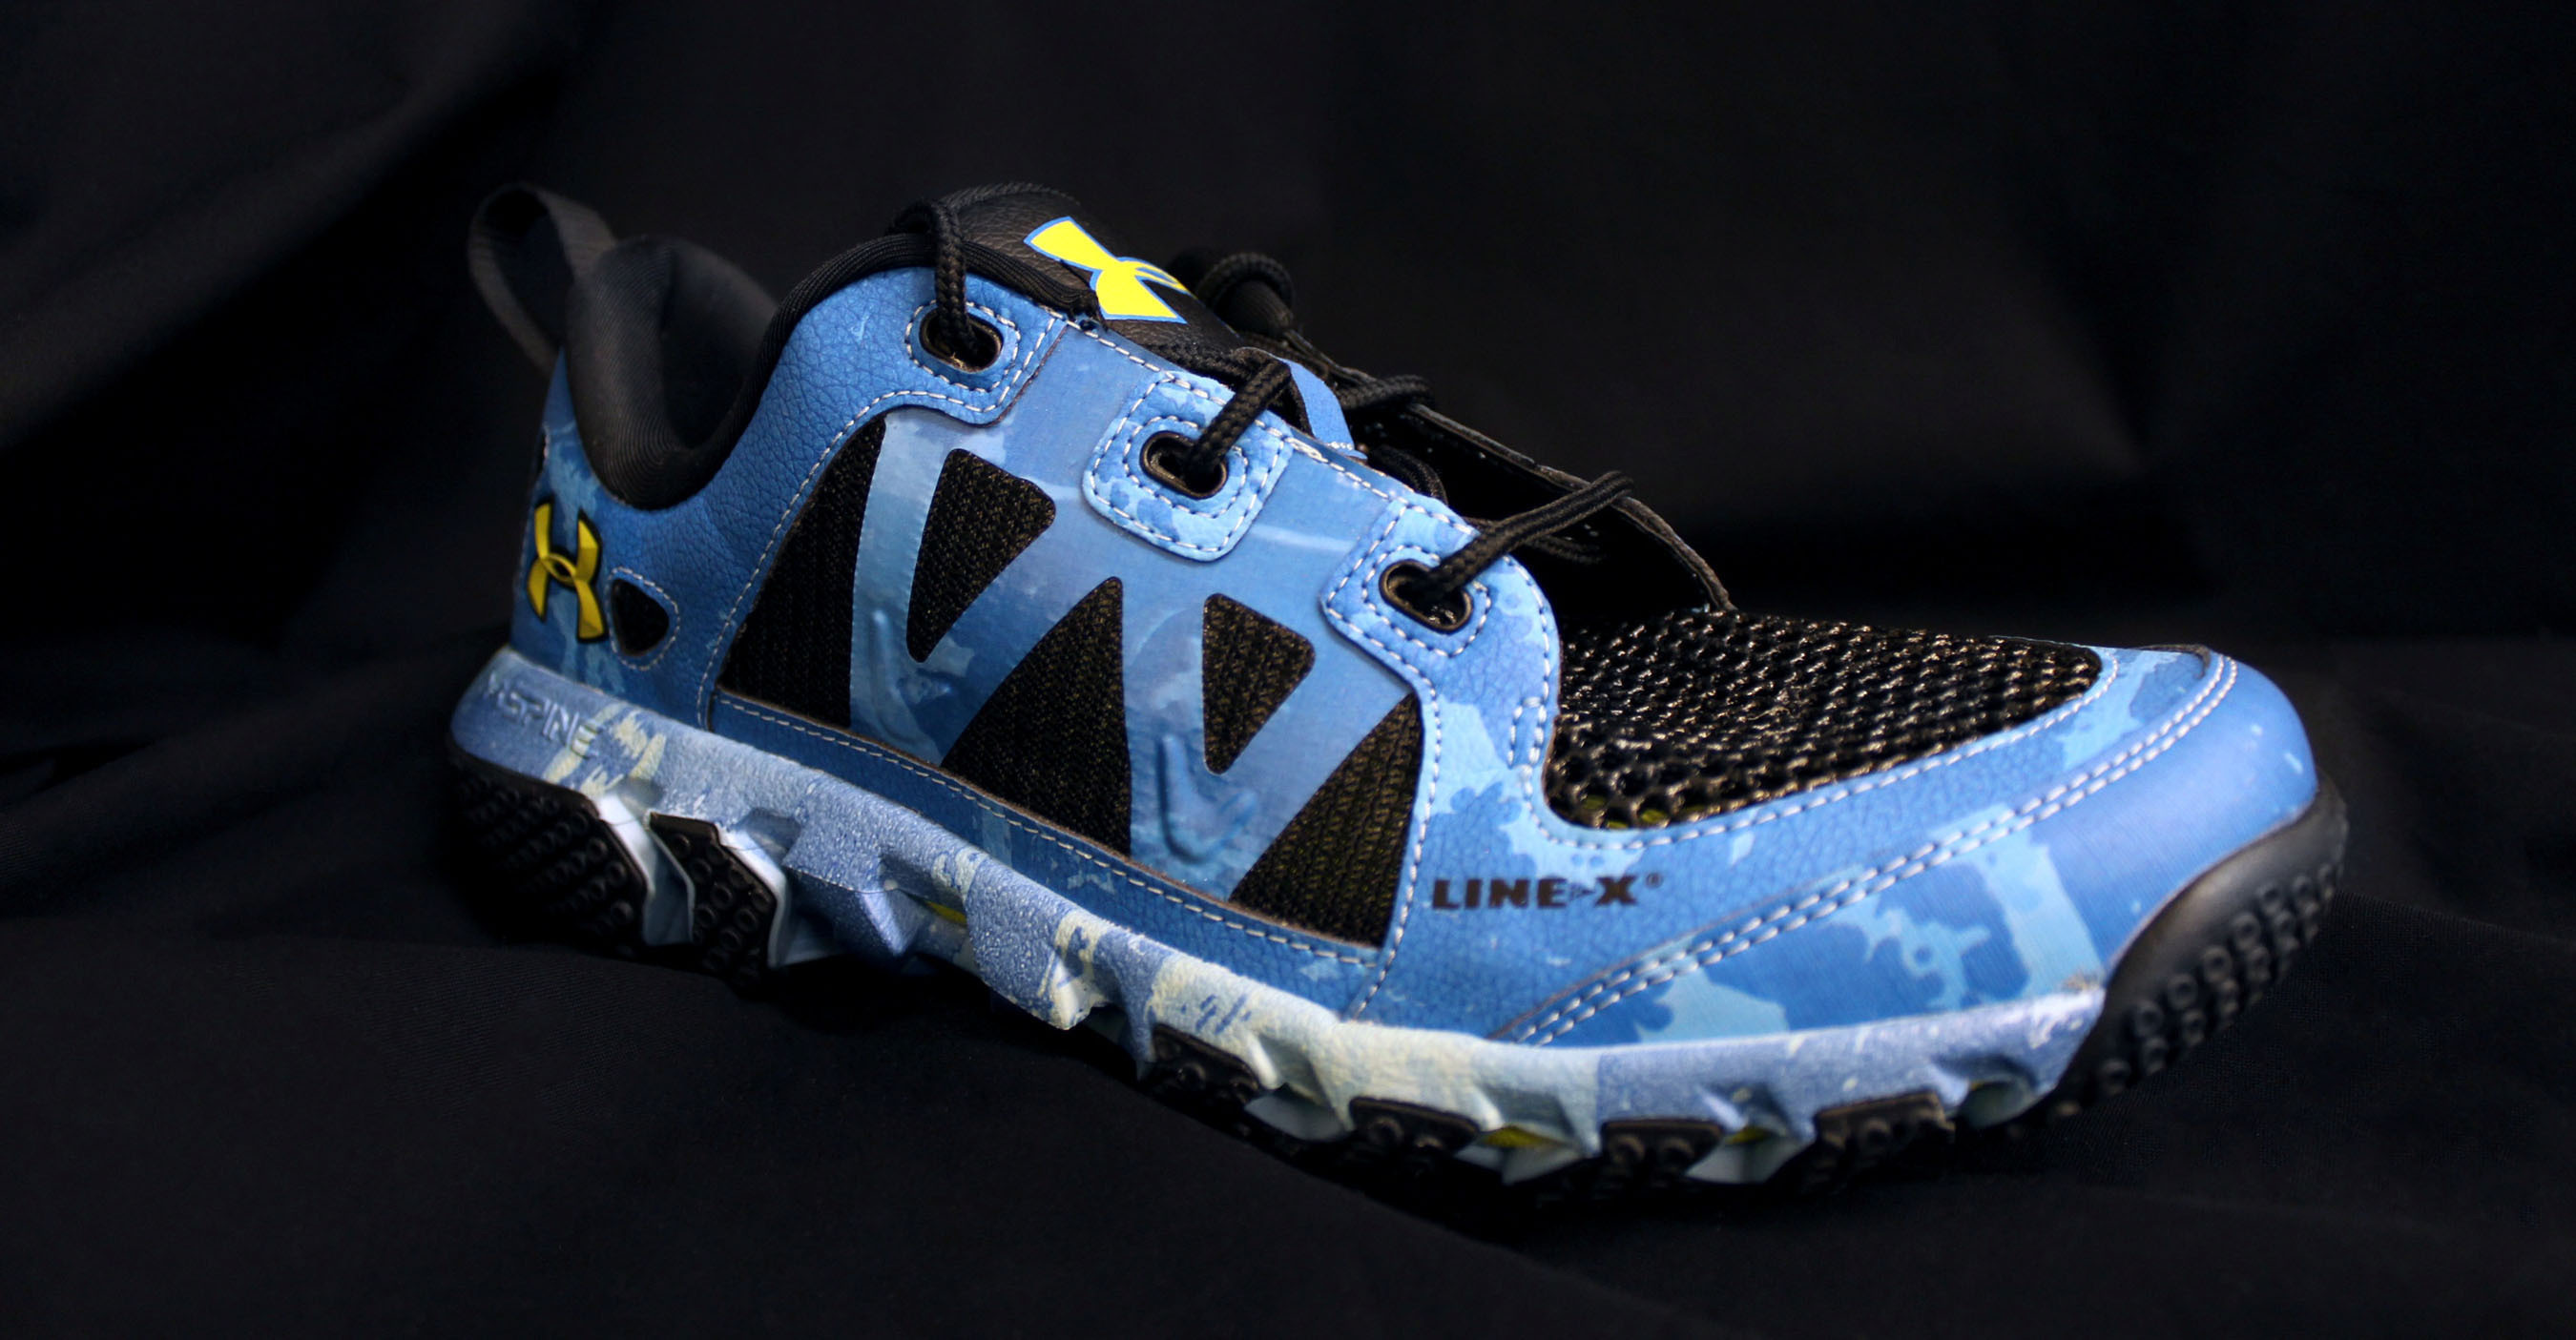 LINE-X Protective Coatings Used for New Under Armour "Water Spider" Shoe. (PRNewsFoto/LINE-X Protective Coatings) (PRNewsFoto/LINE-X PROTECTIVE COATINGS)